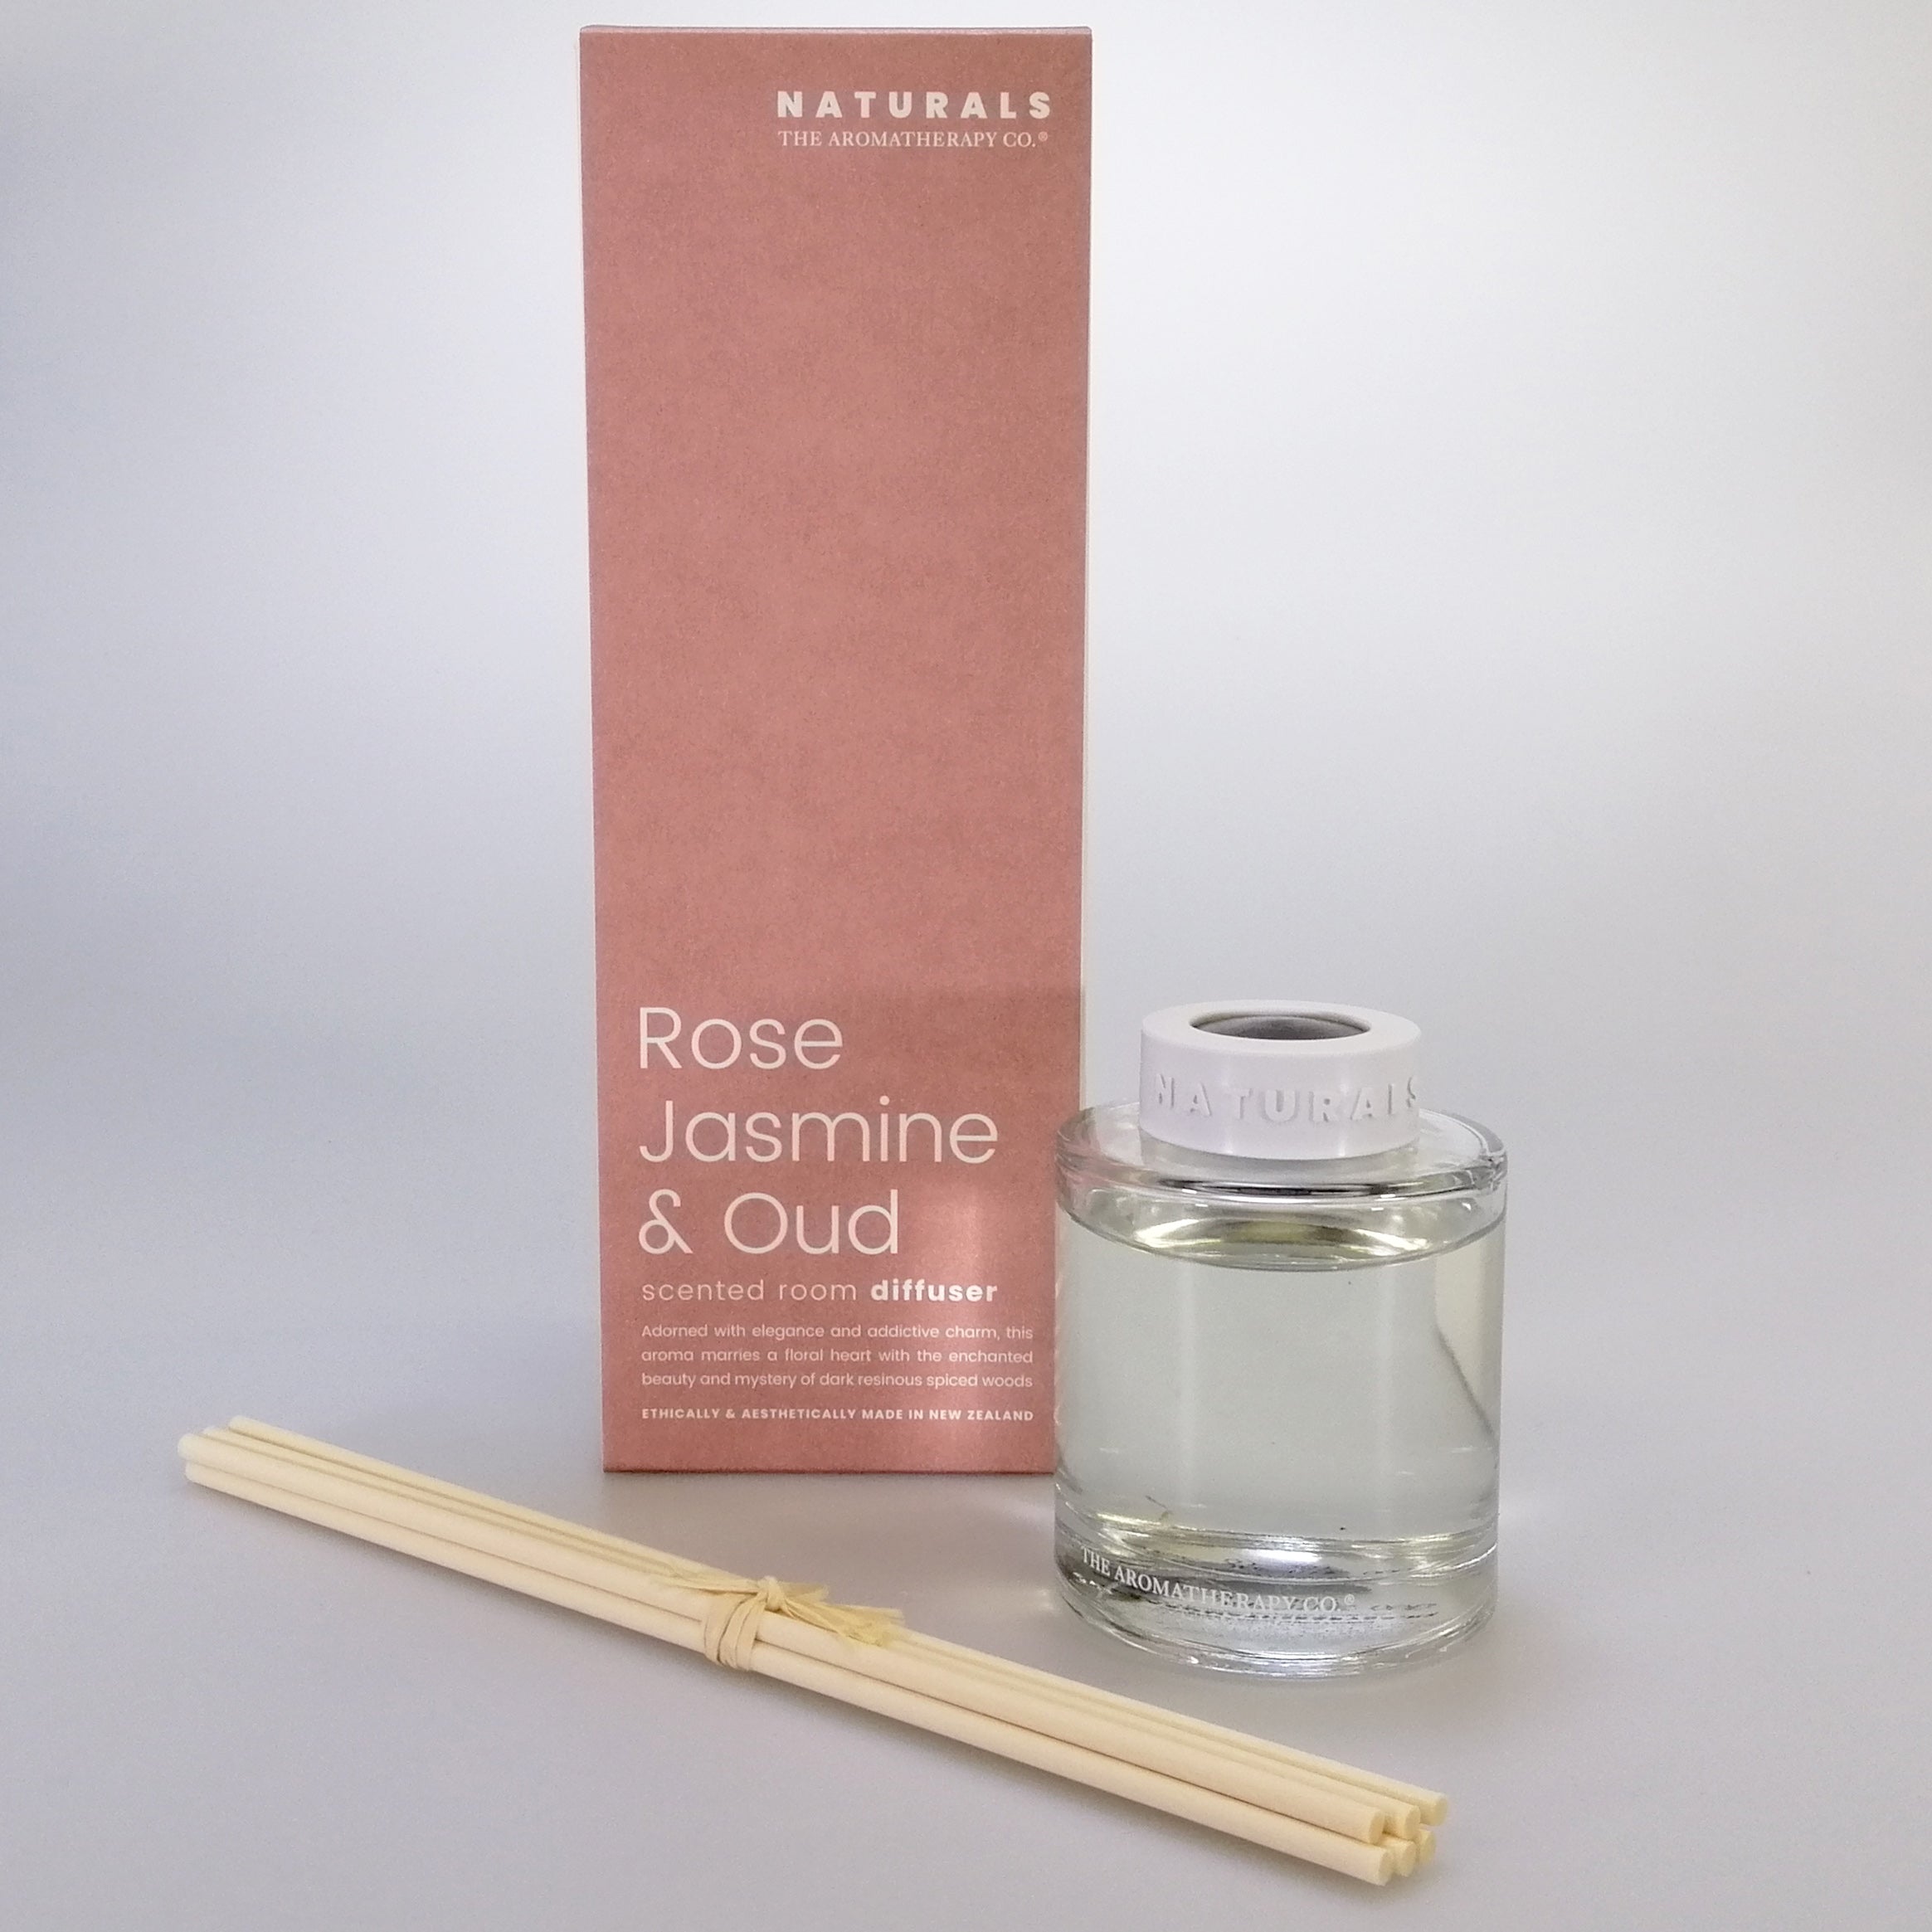 The Aromatherapy Co. Naturals - Rose Jasmine & Oud Diffuser